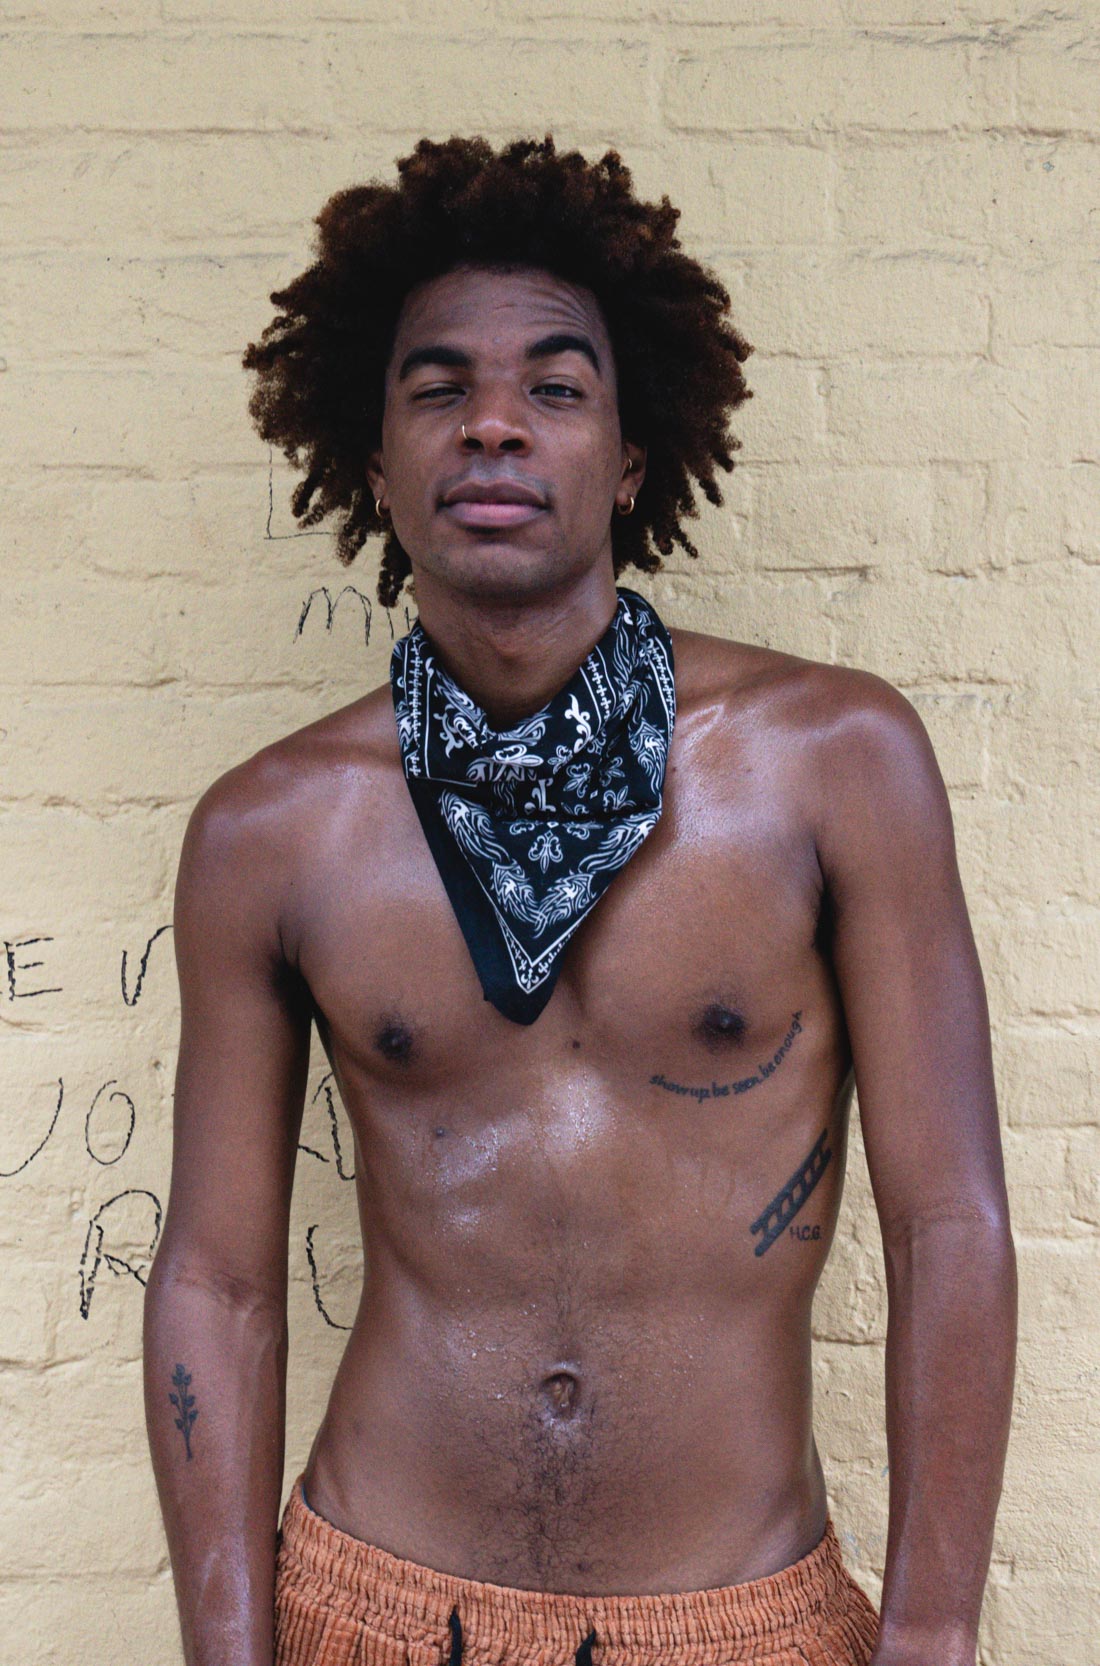 A shirtless man standing and posing on Bourbon Street in New Orleans